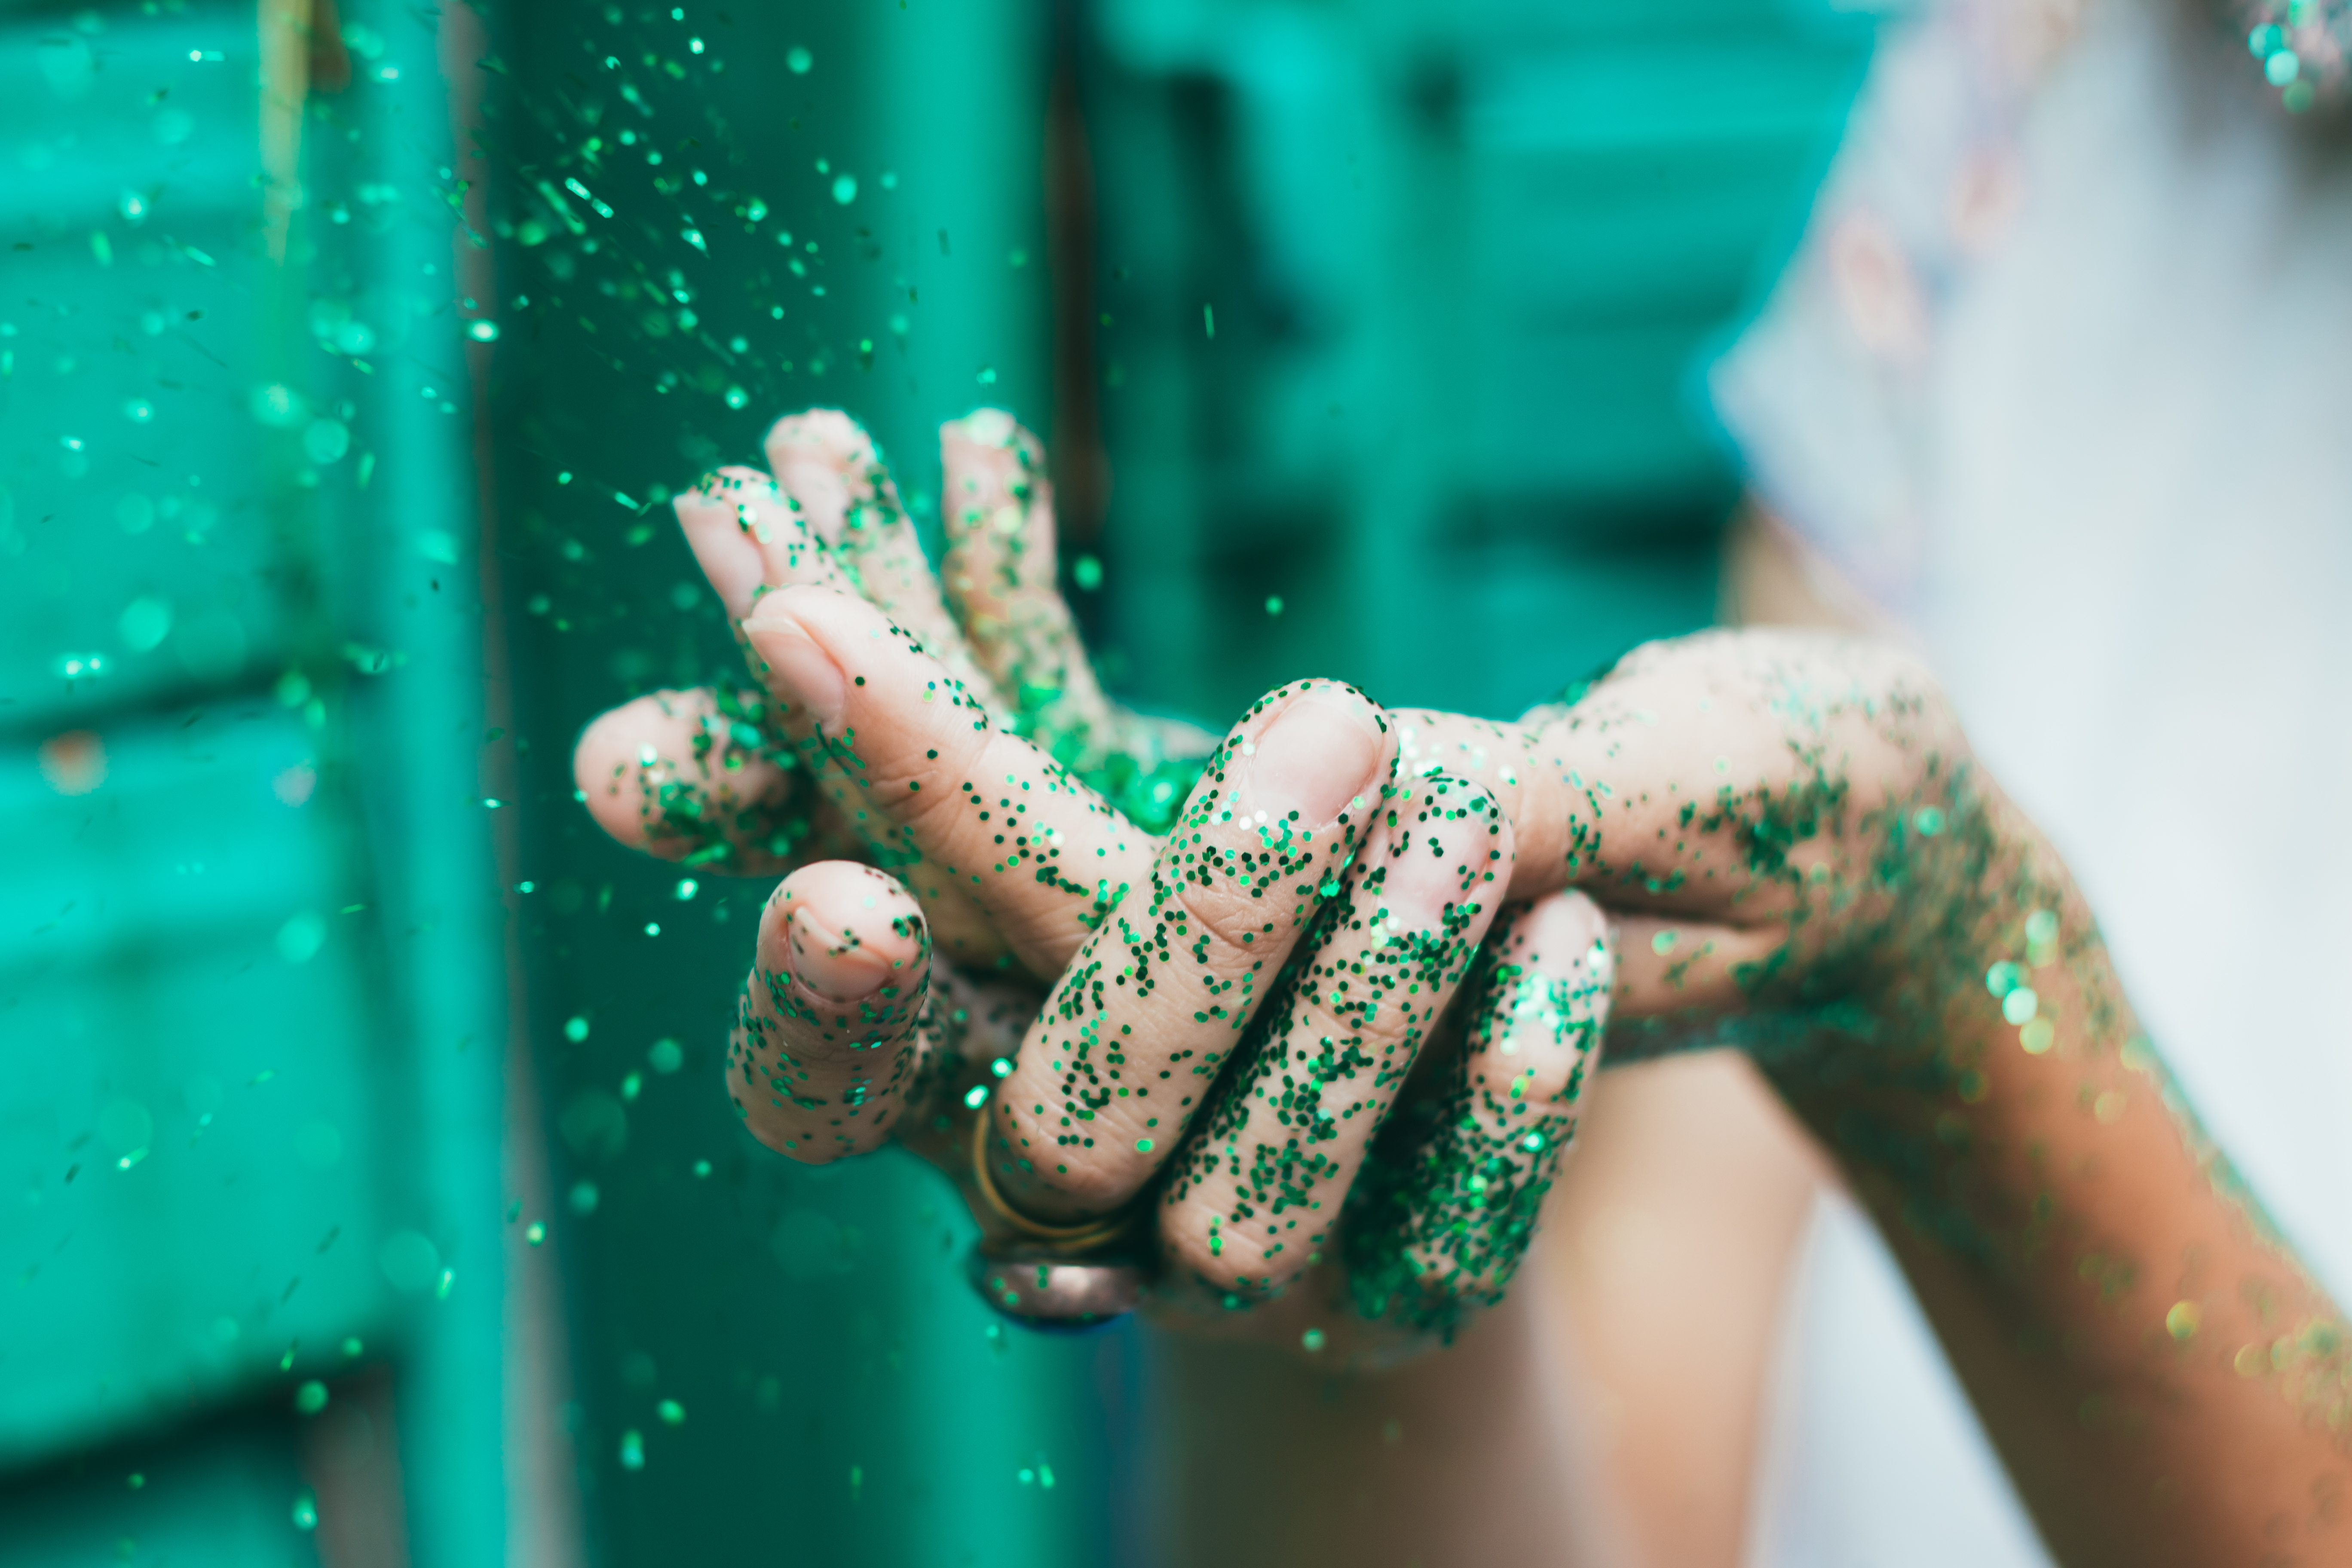 A child's hands filled with green glitter | Source: Shutterstock